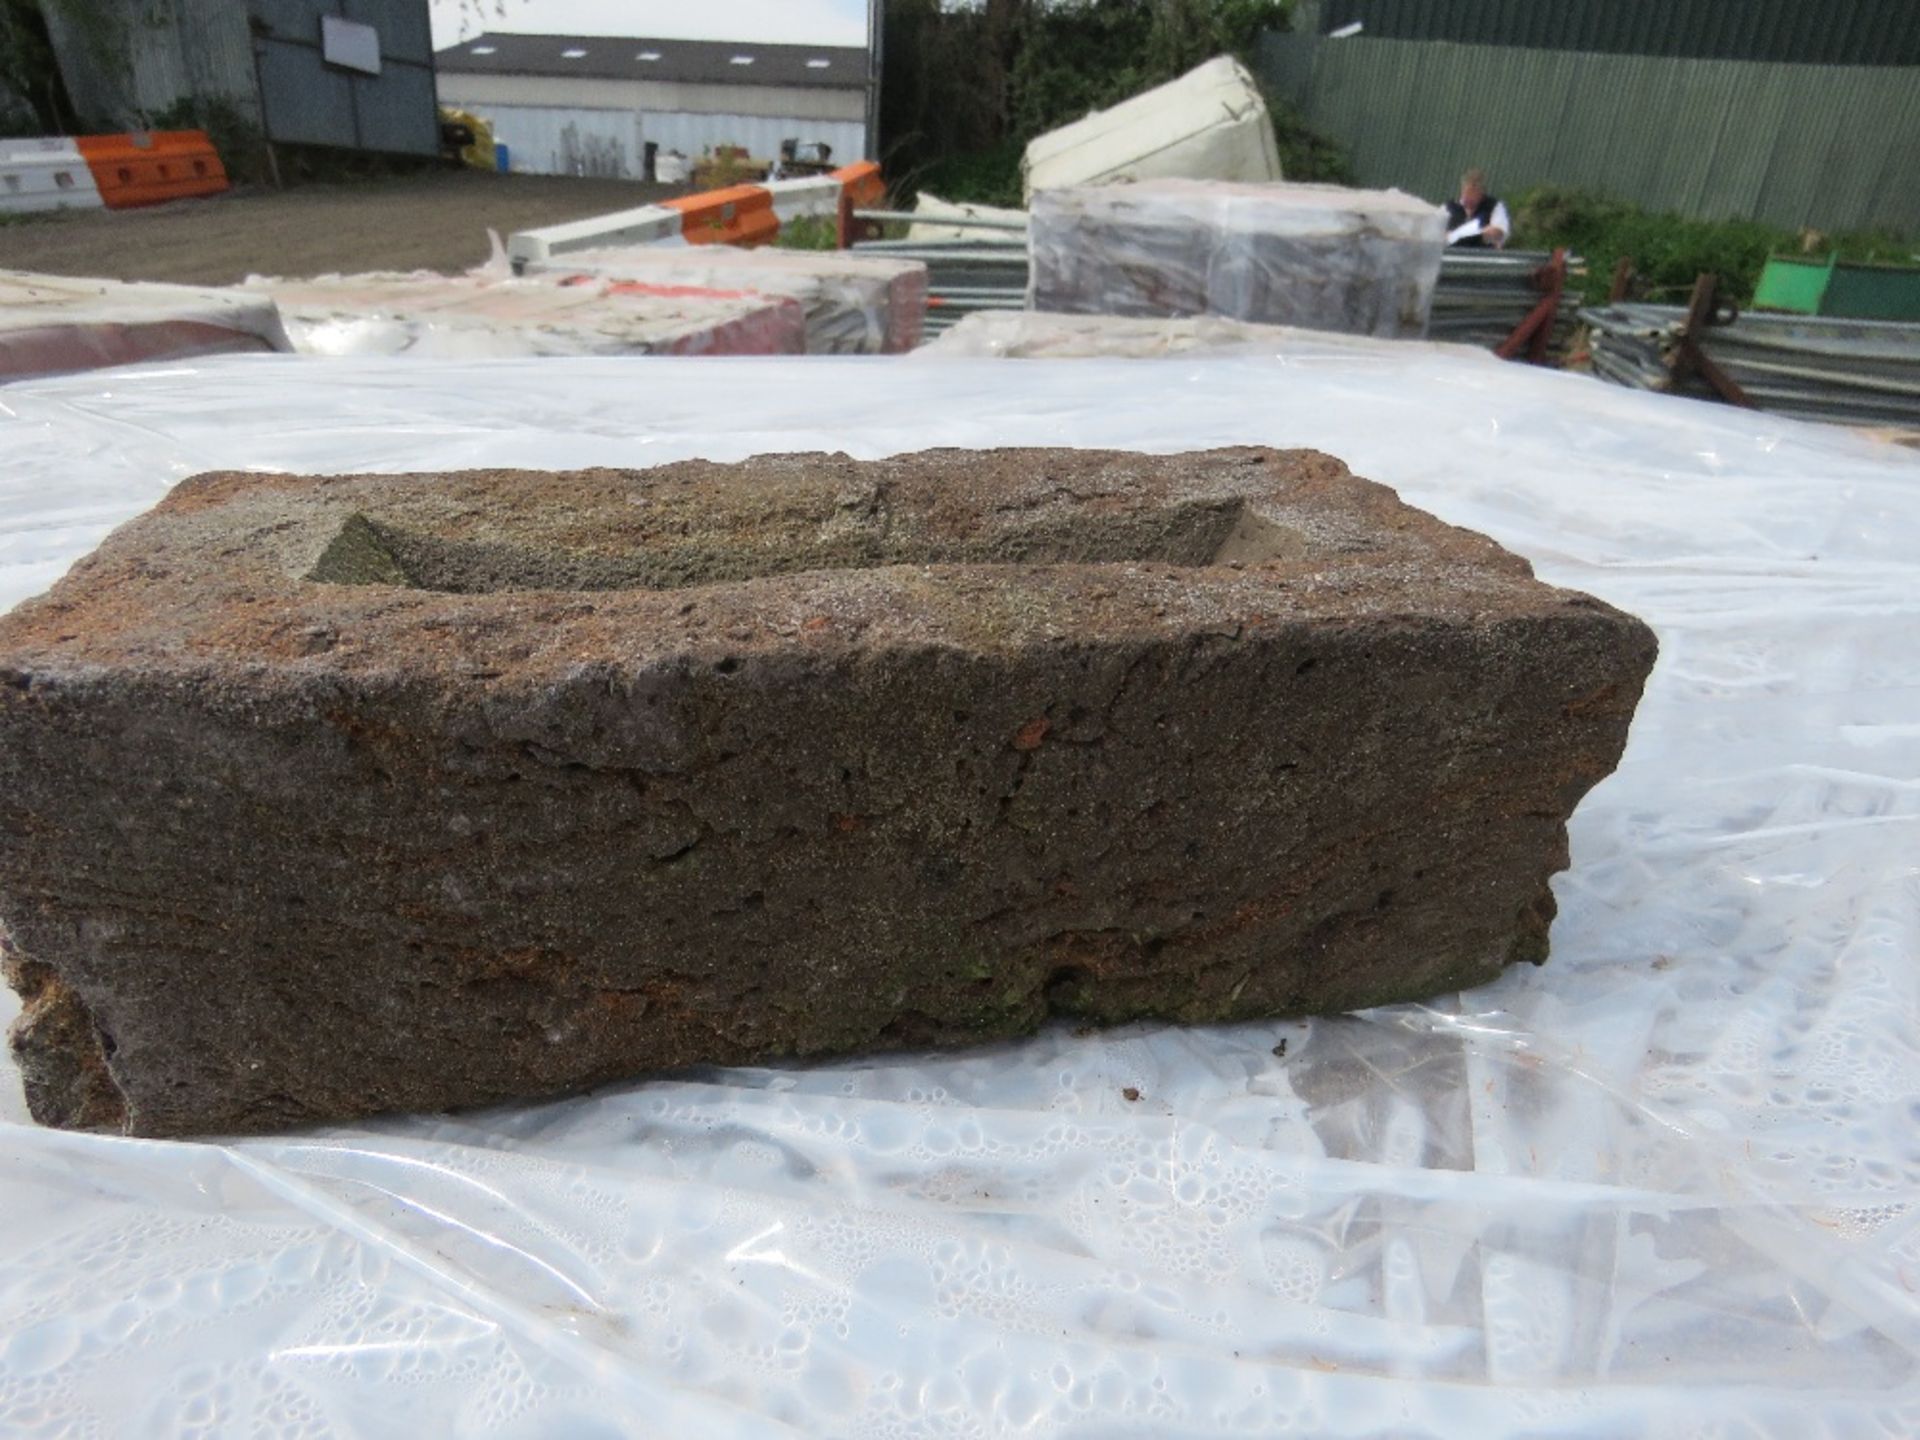 3 X PACKS OF RUSHINGTON ANTIQUE (DALI) BRICKS, CODE T33. BELIEVED TO BE 730NO IN EACH PACK. THIS - Image 10 of 17